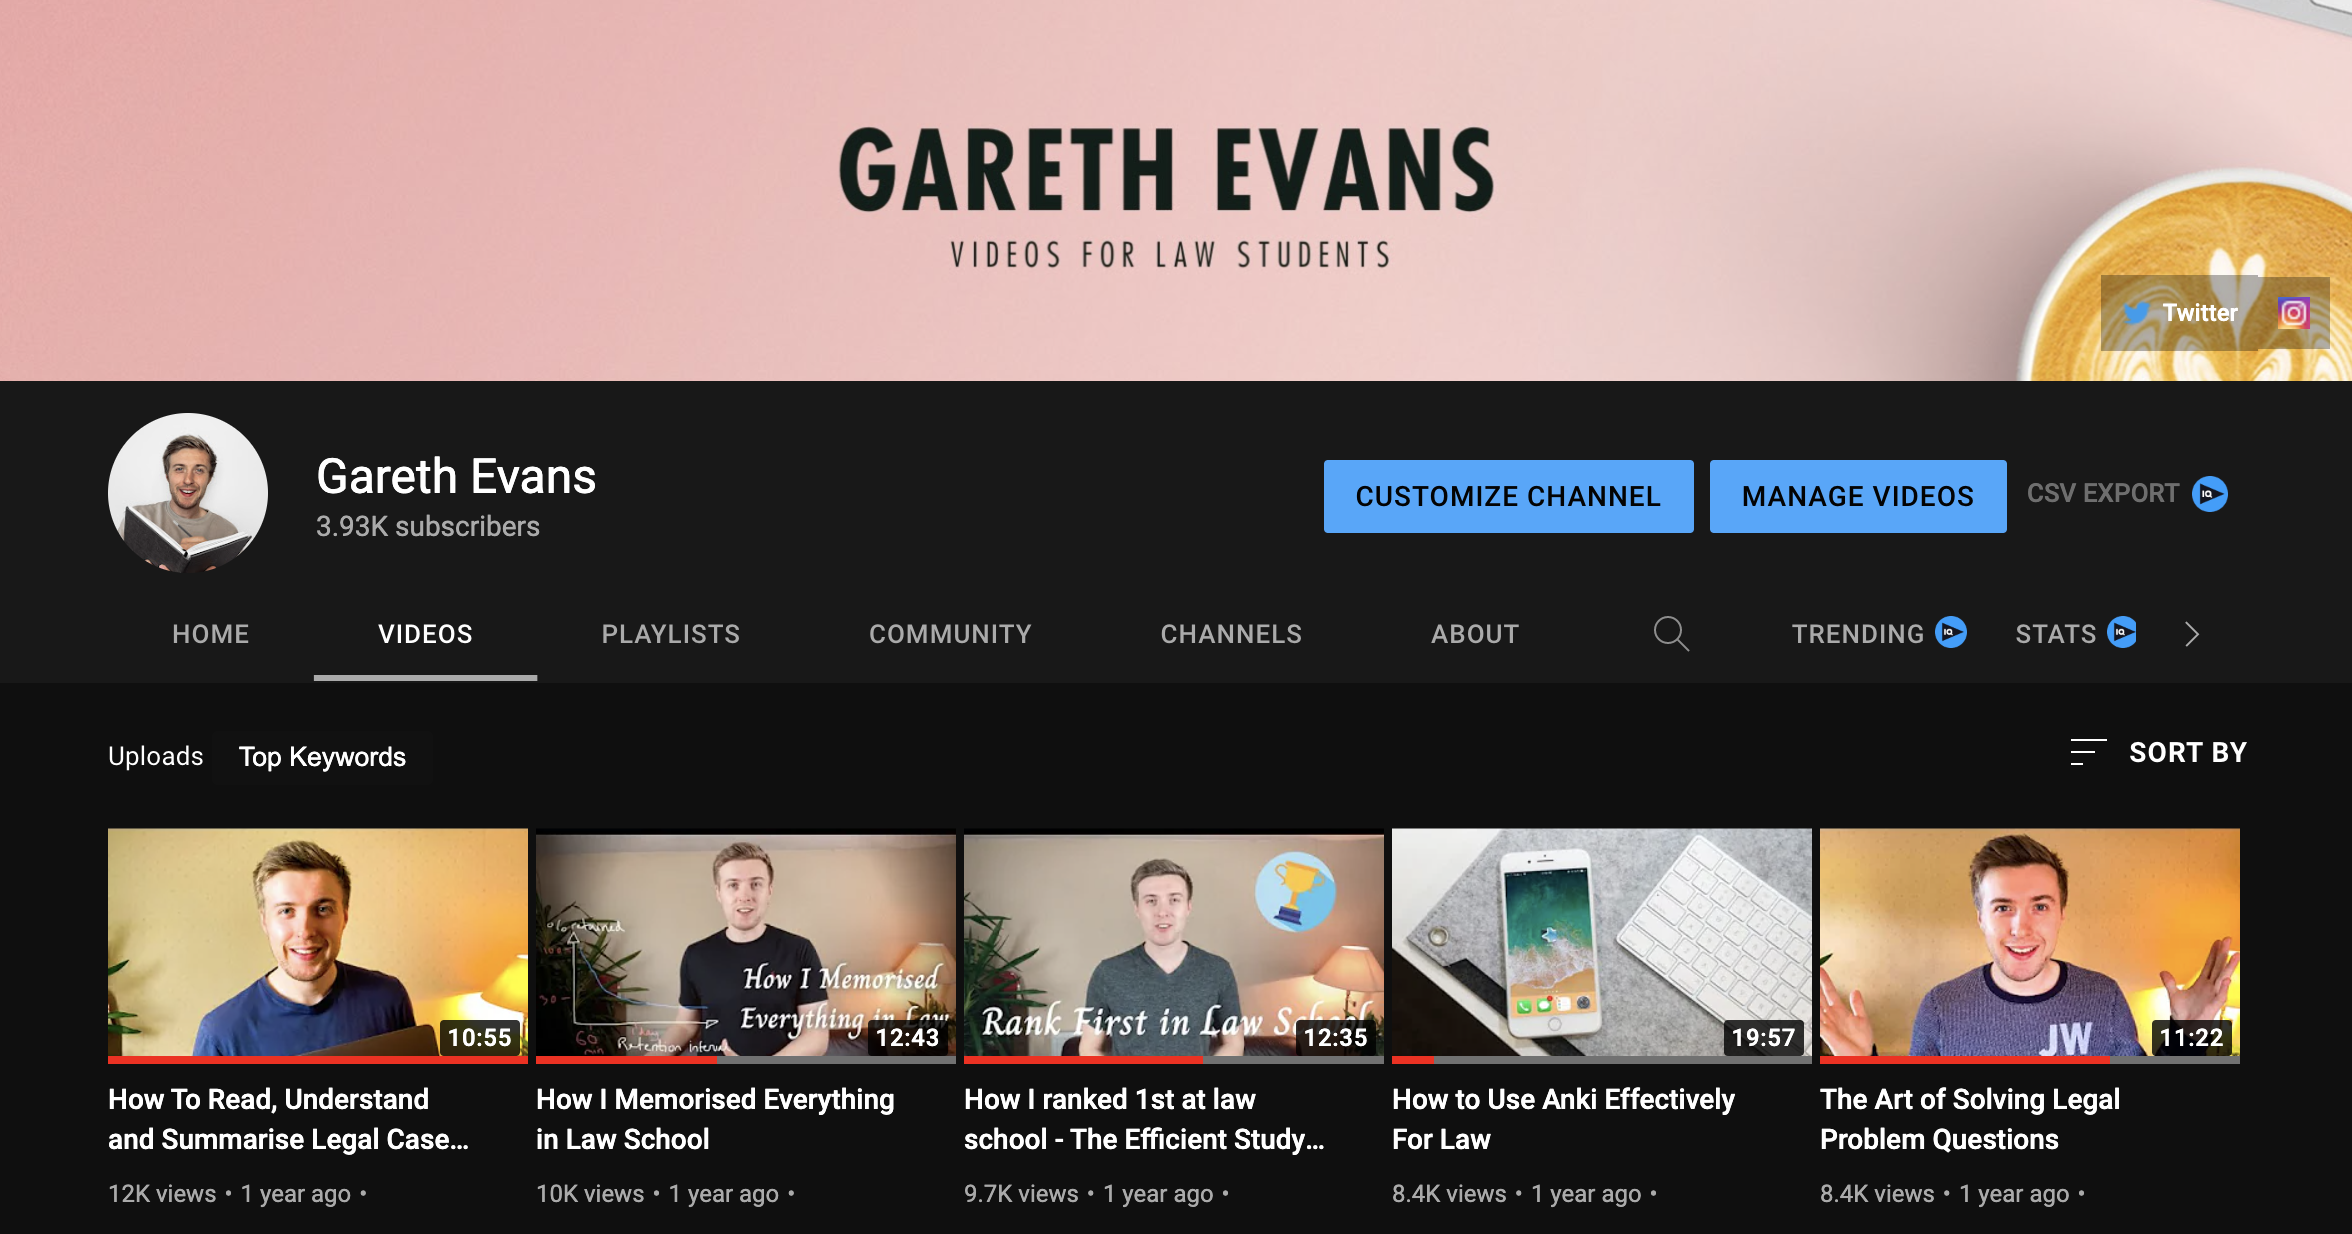 Gareth Evans' personal youtube channel